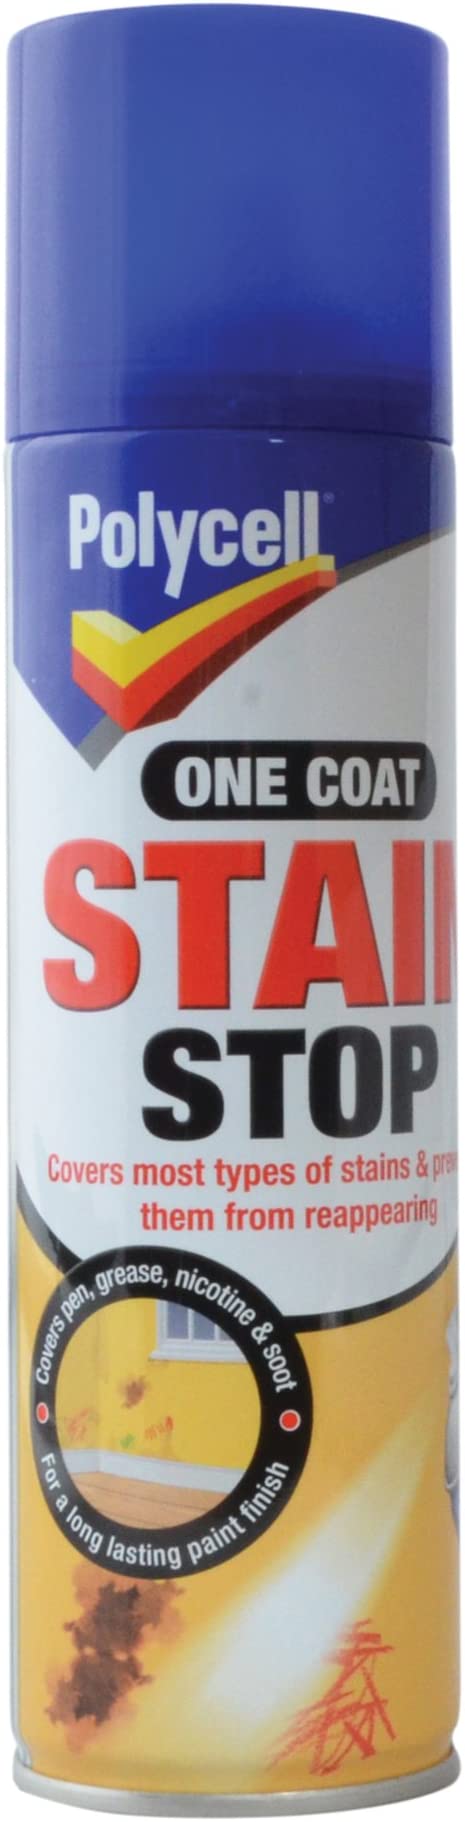 Polycell Stain Stop, 250 ml